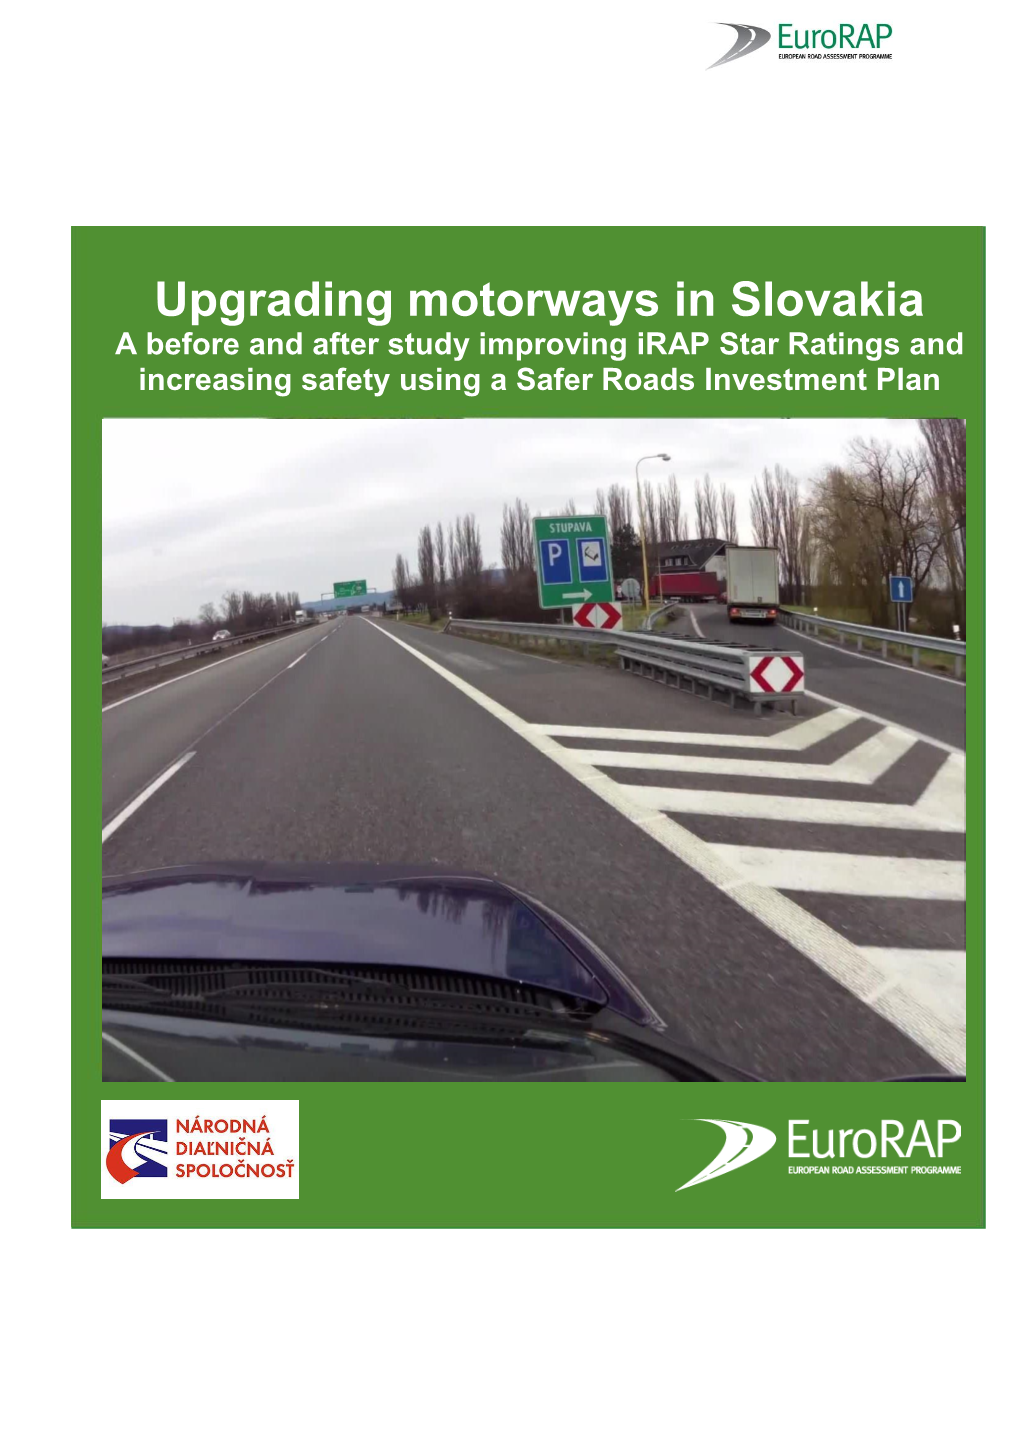 Upgrading Motorways in Slovakia a Before and After Study Improving Irap Star Ratings and Increasing Safety Using a Safer Roads Investment Plan